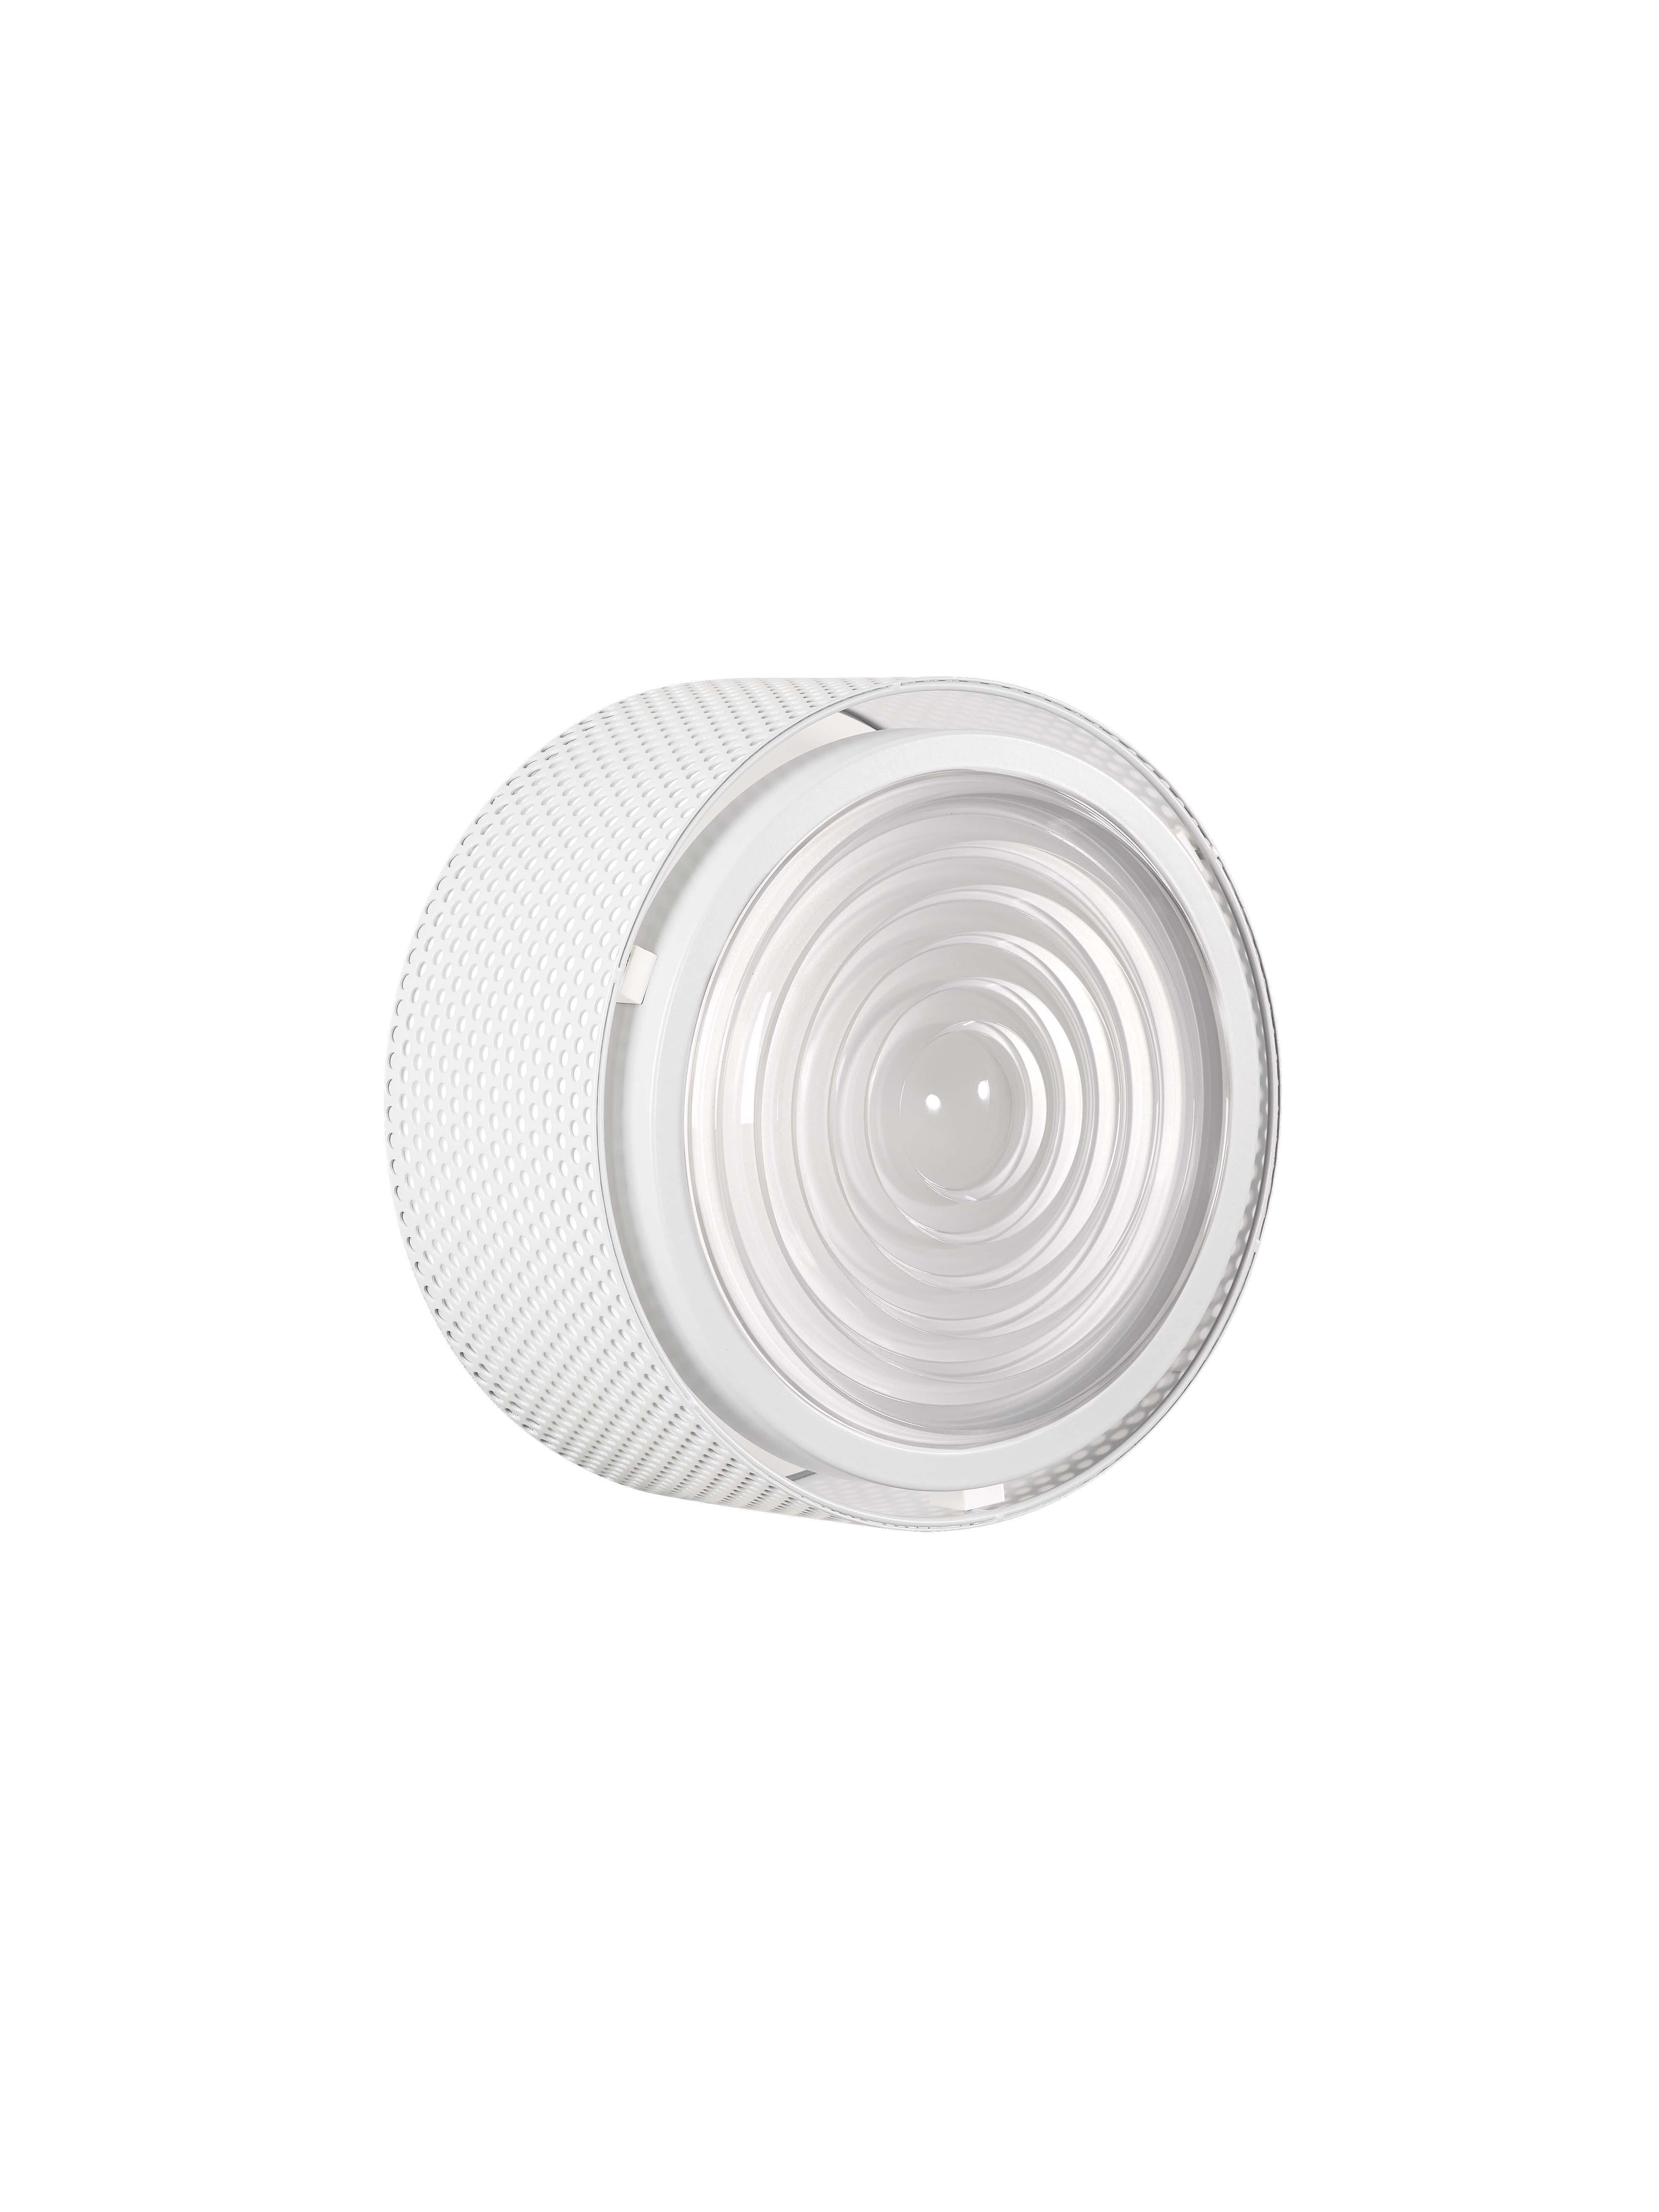 Pierre Guariche 'G13' Wall or Ceiling Light for Sammode Studio in White For Sale 2